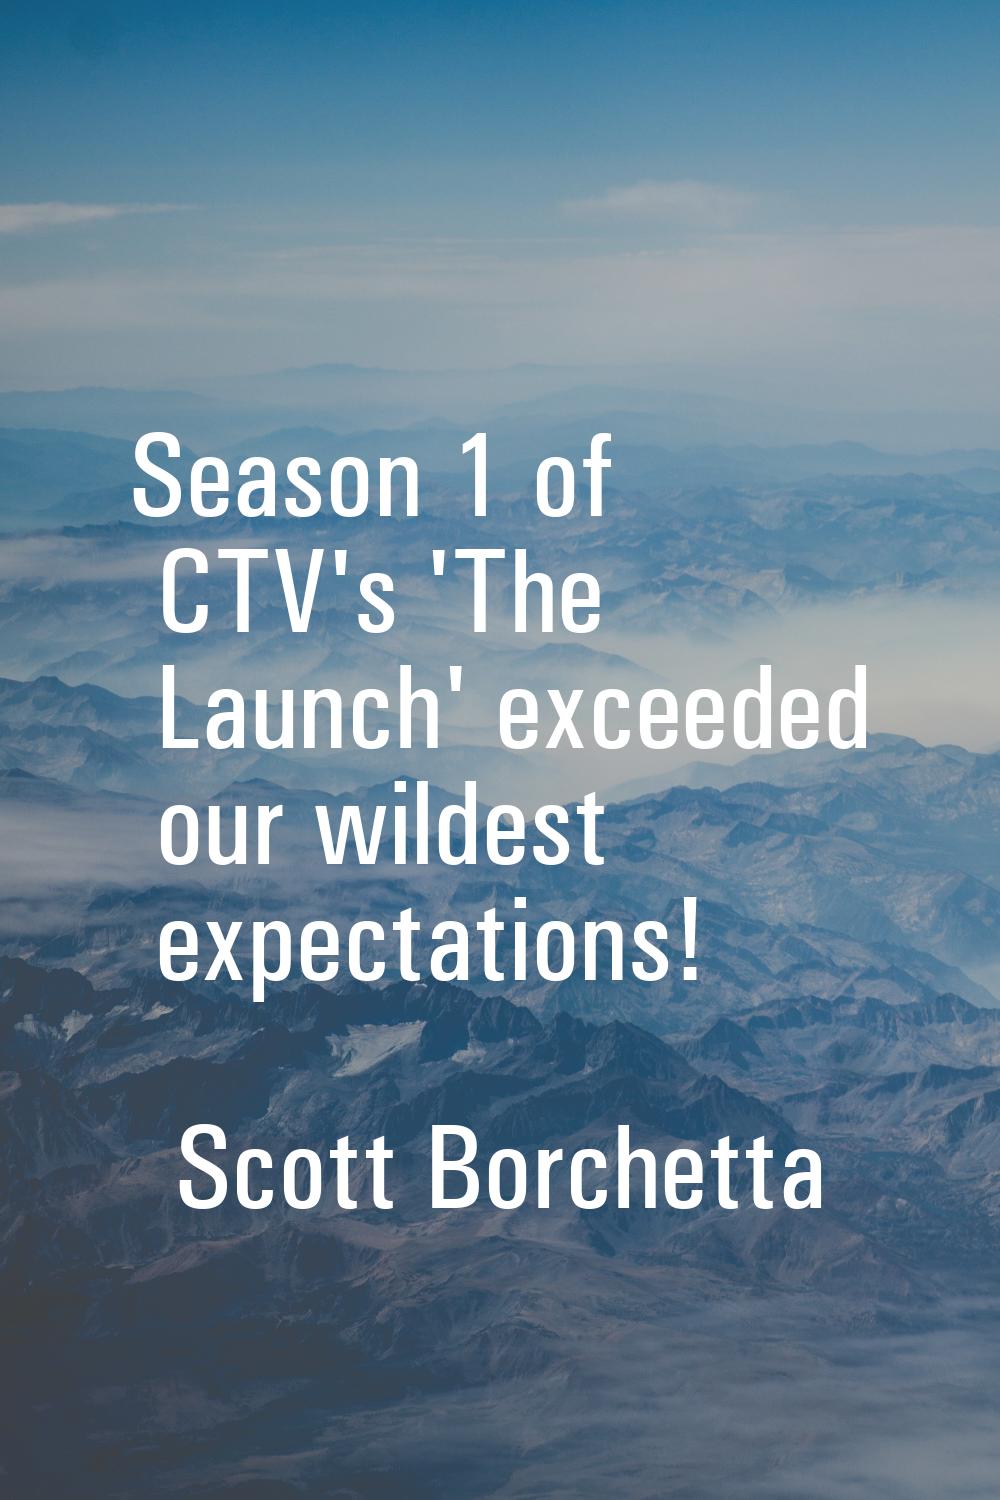 Season 1 of CTV's 'The Launch' exceeded our wildest expectations!